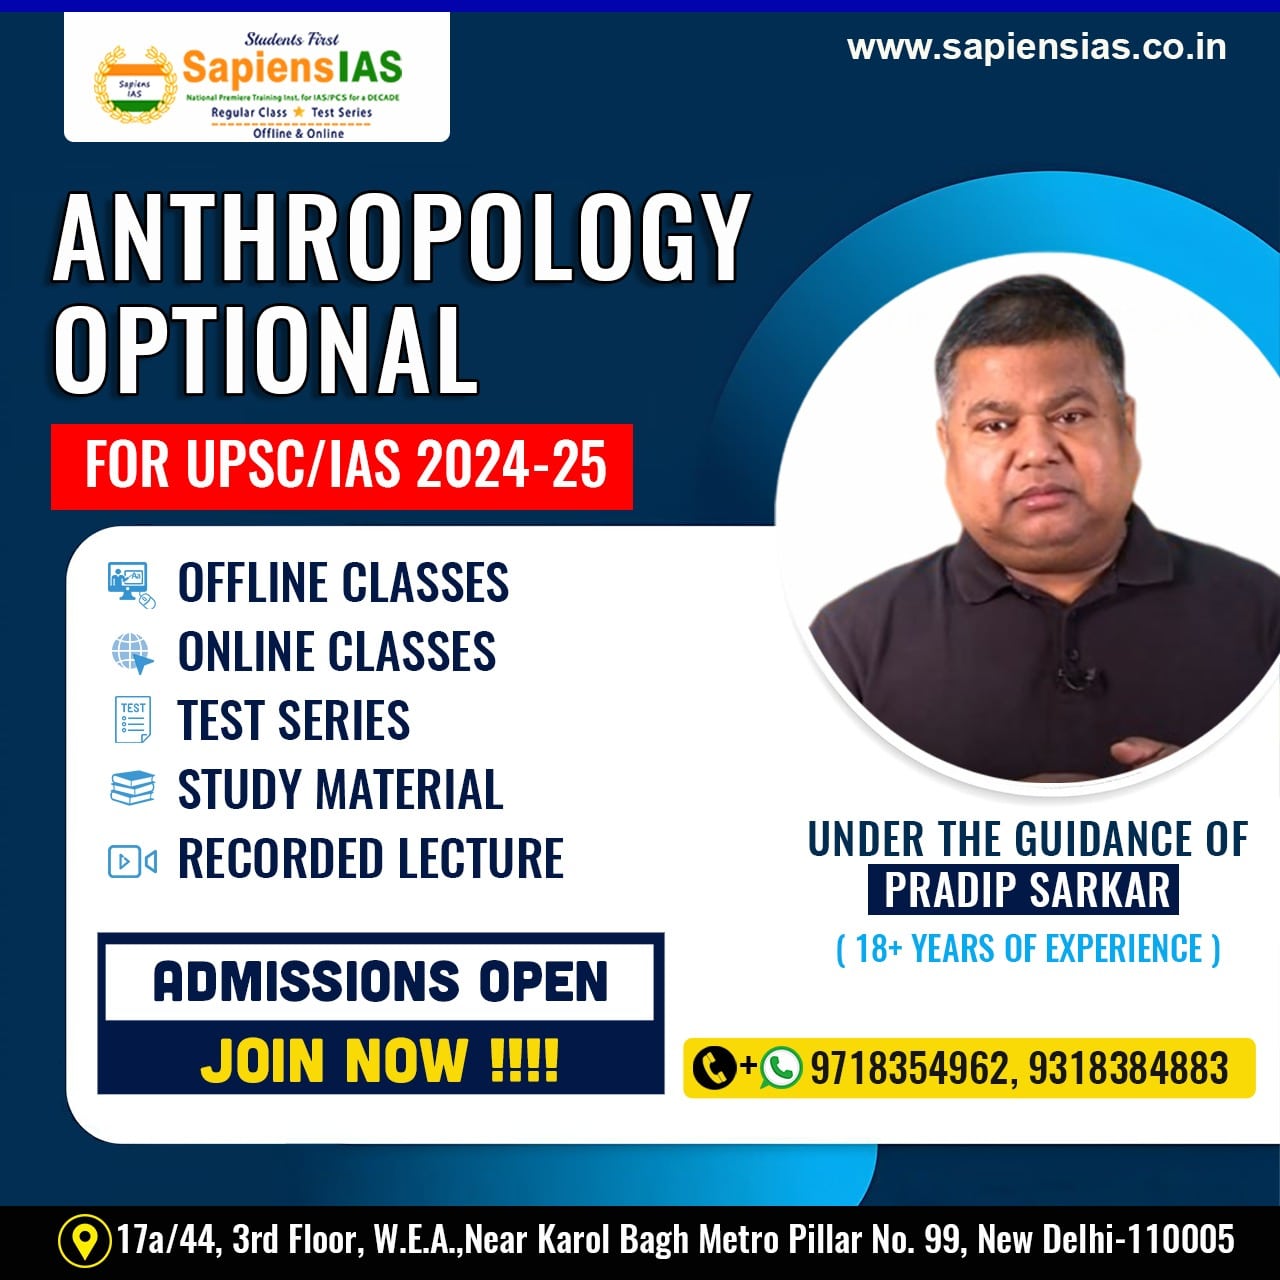 How is Sapiens IAS Coaching For Anthropology Optional